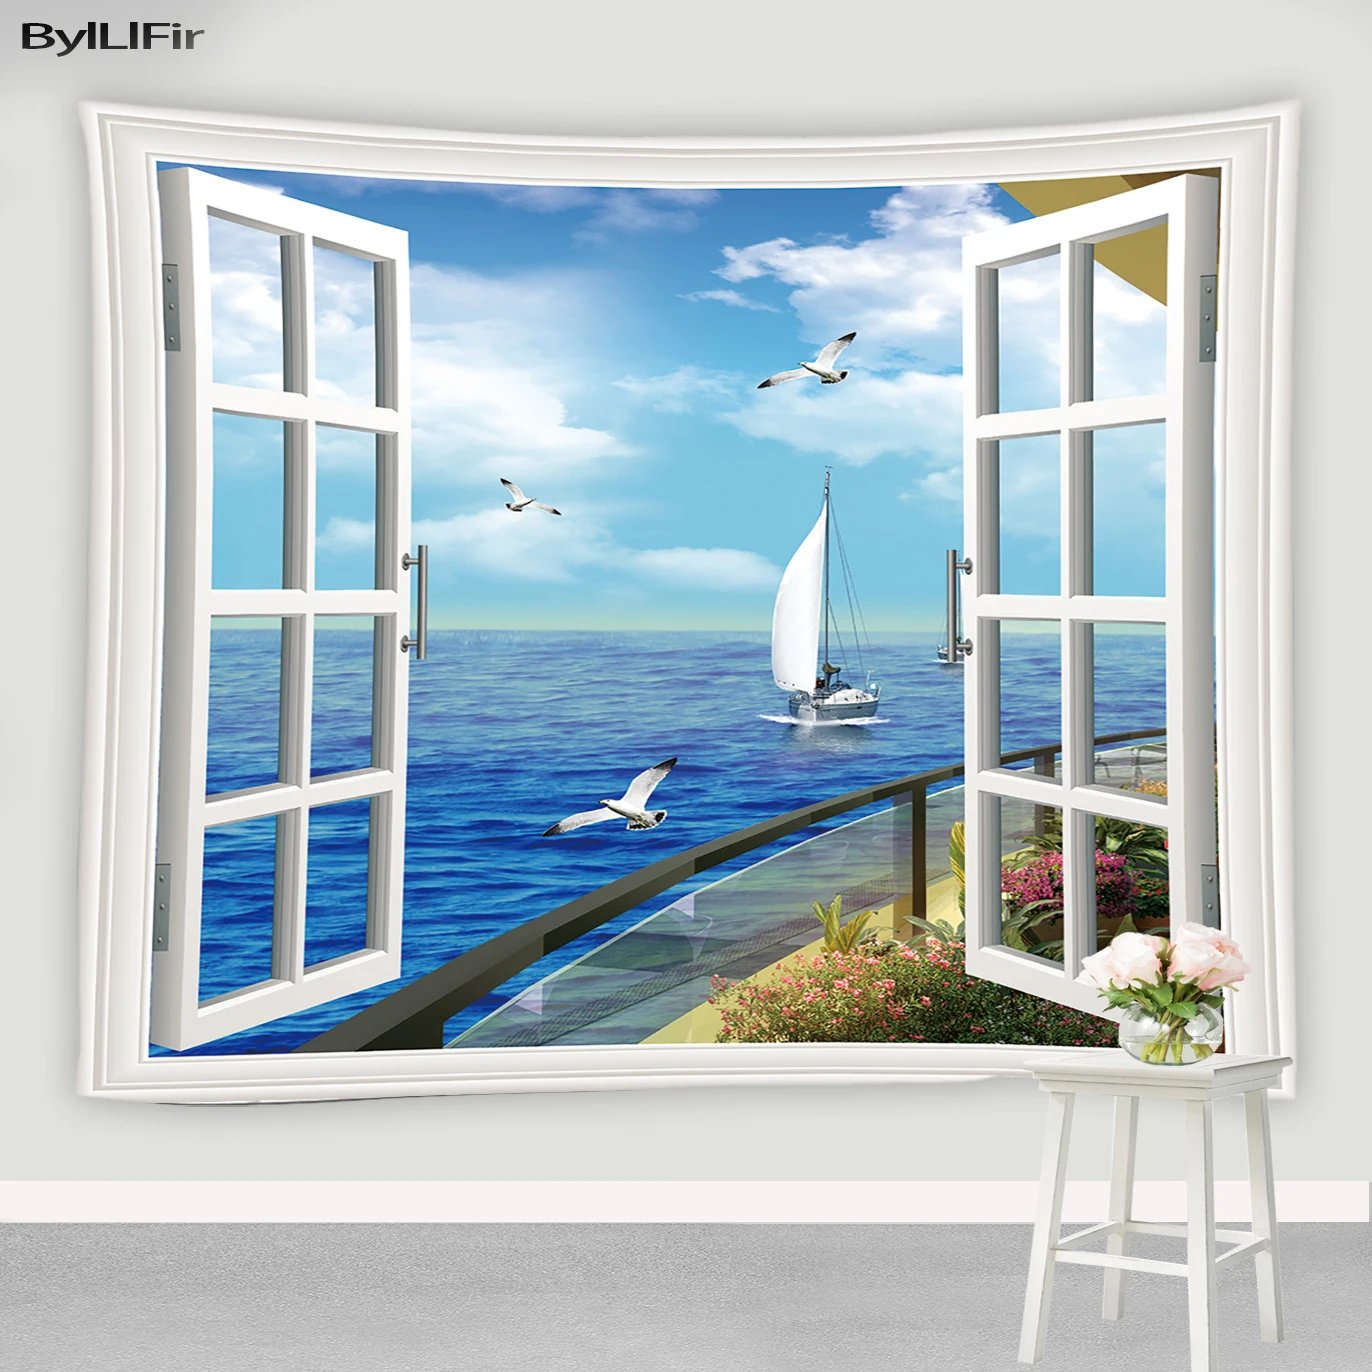 Sunny Beach Window Palm Flowers Tapestry Wall Hanging Living Room Bedroom Decor 